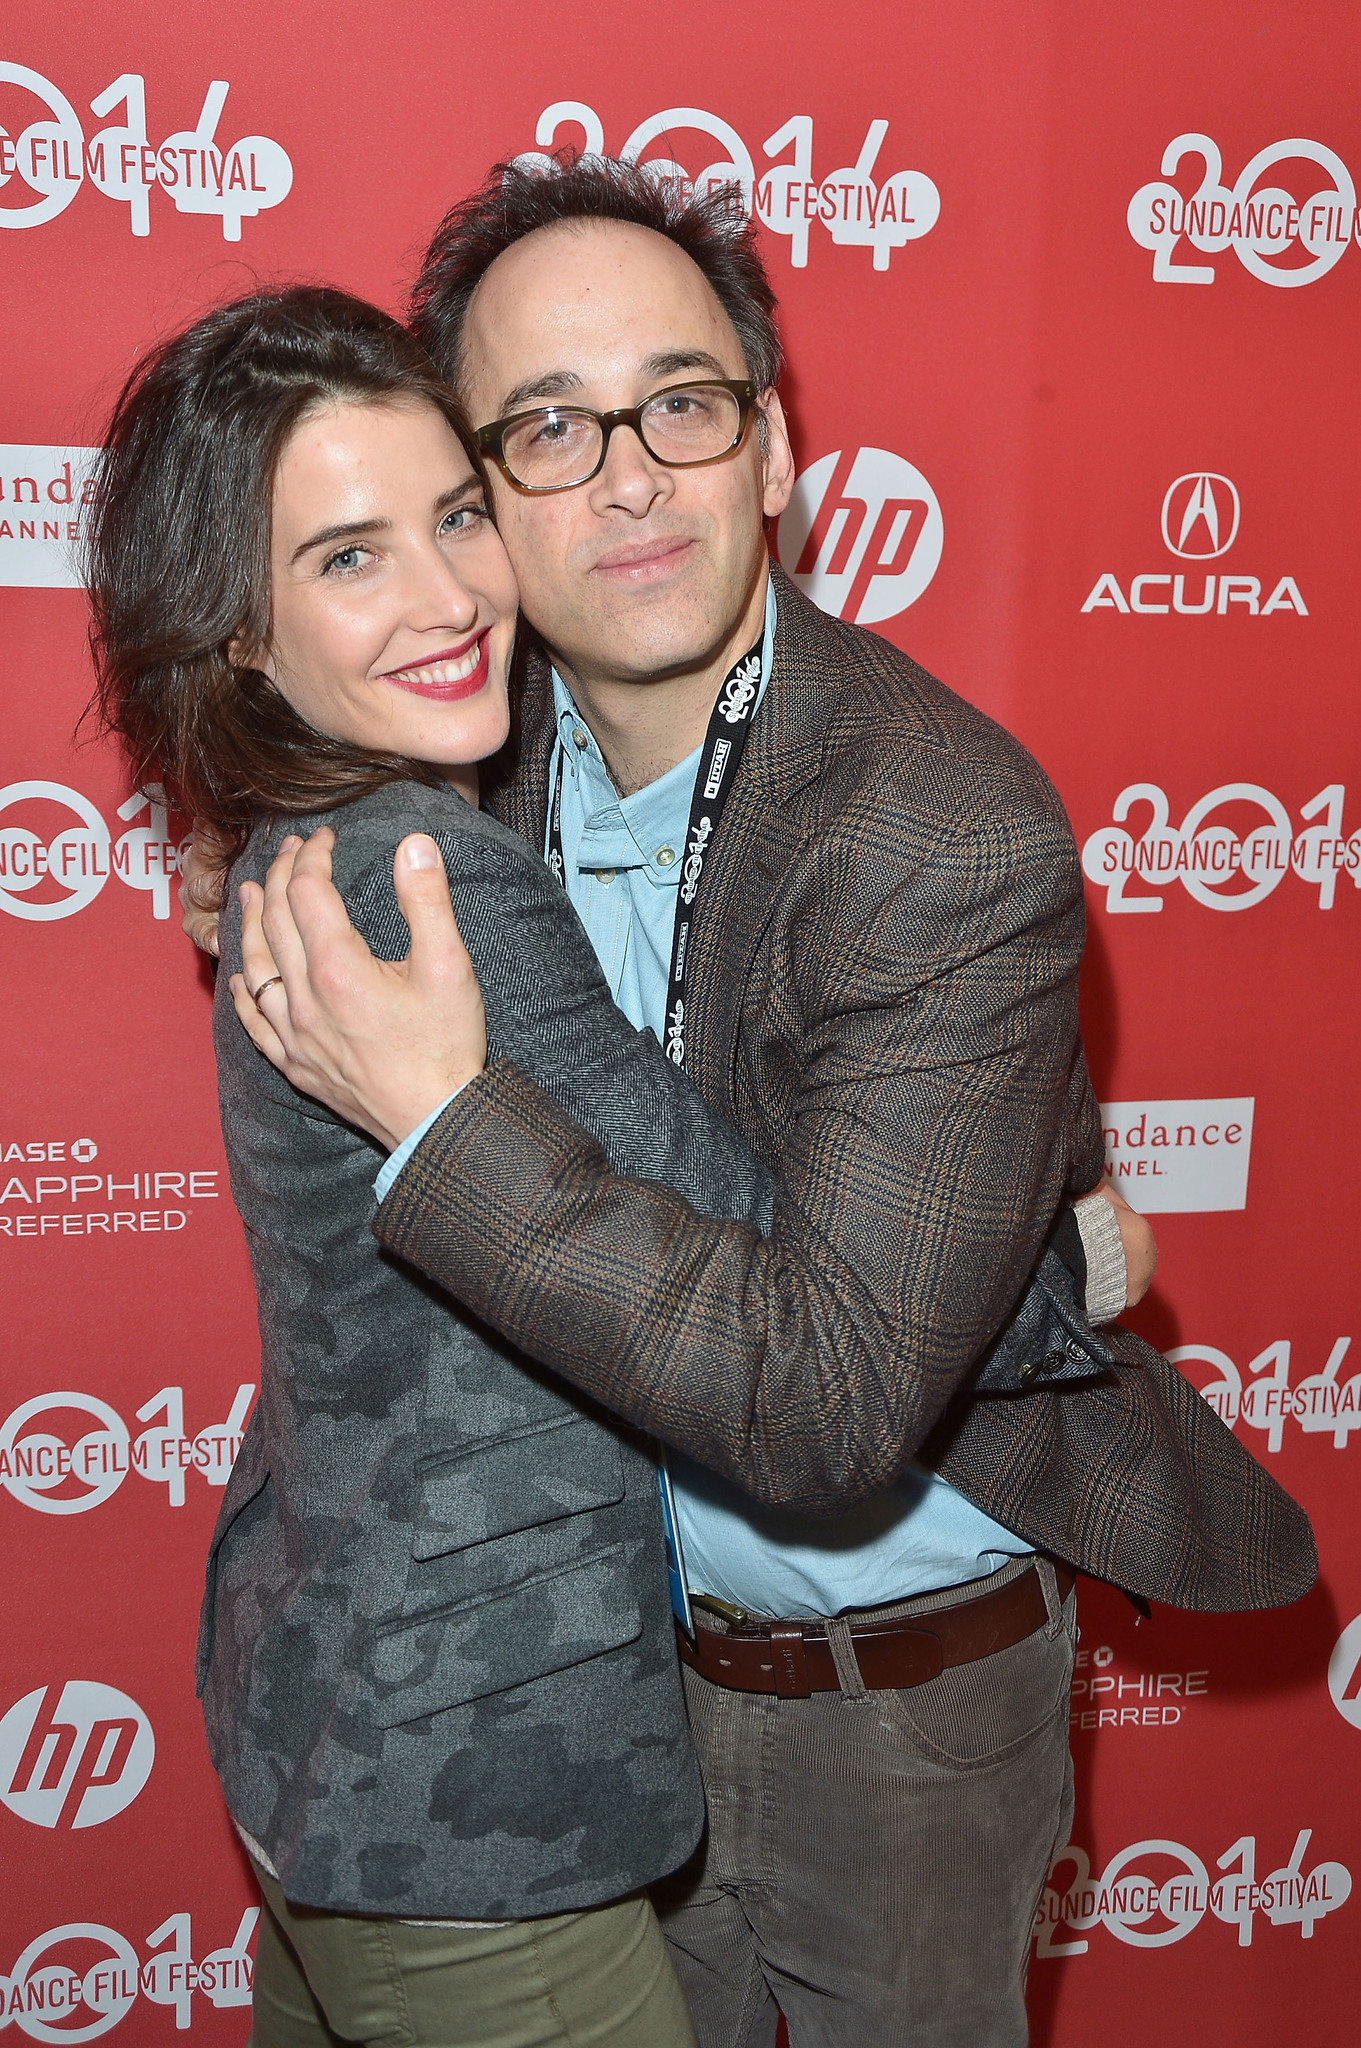 David Wain and Cobie Smulders at event of They Came Together (2014)